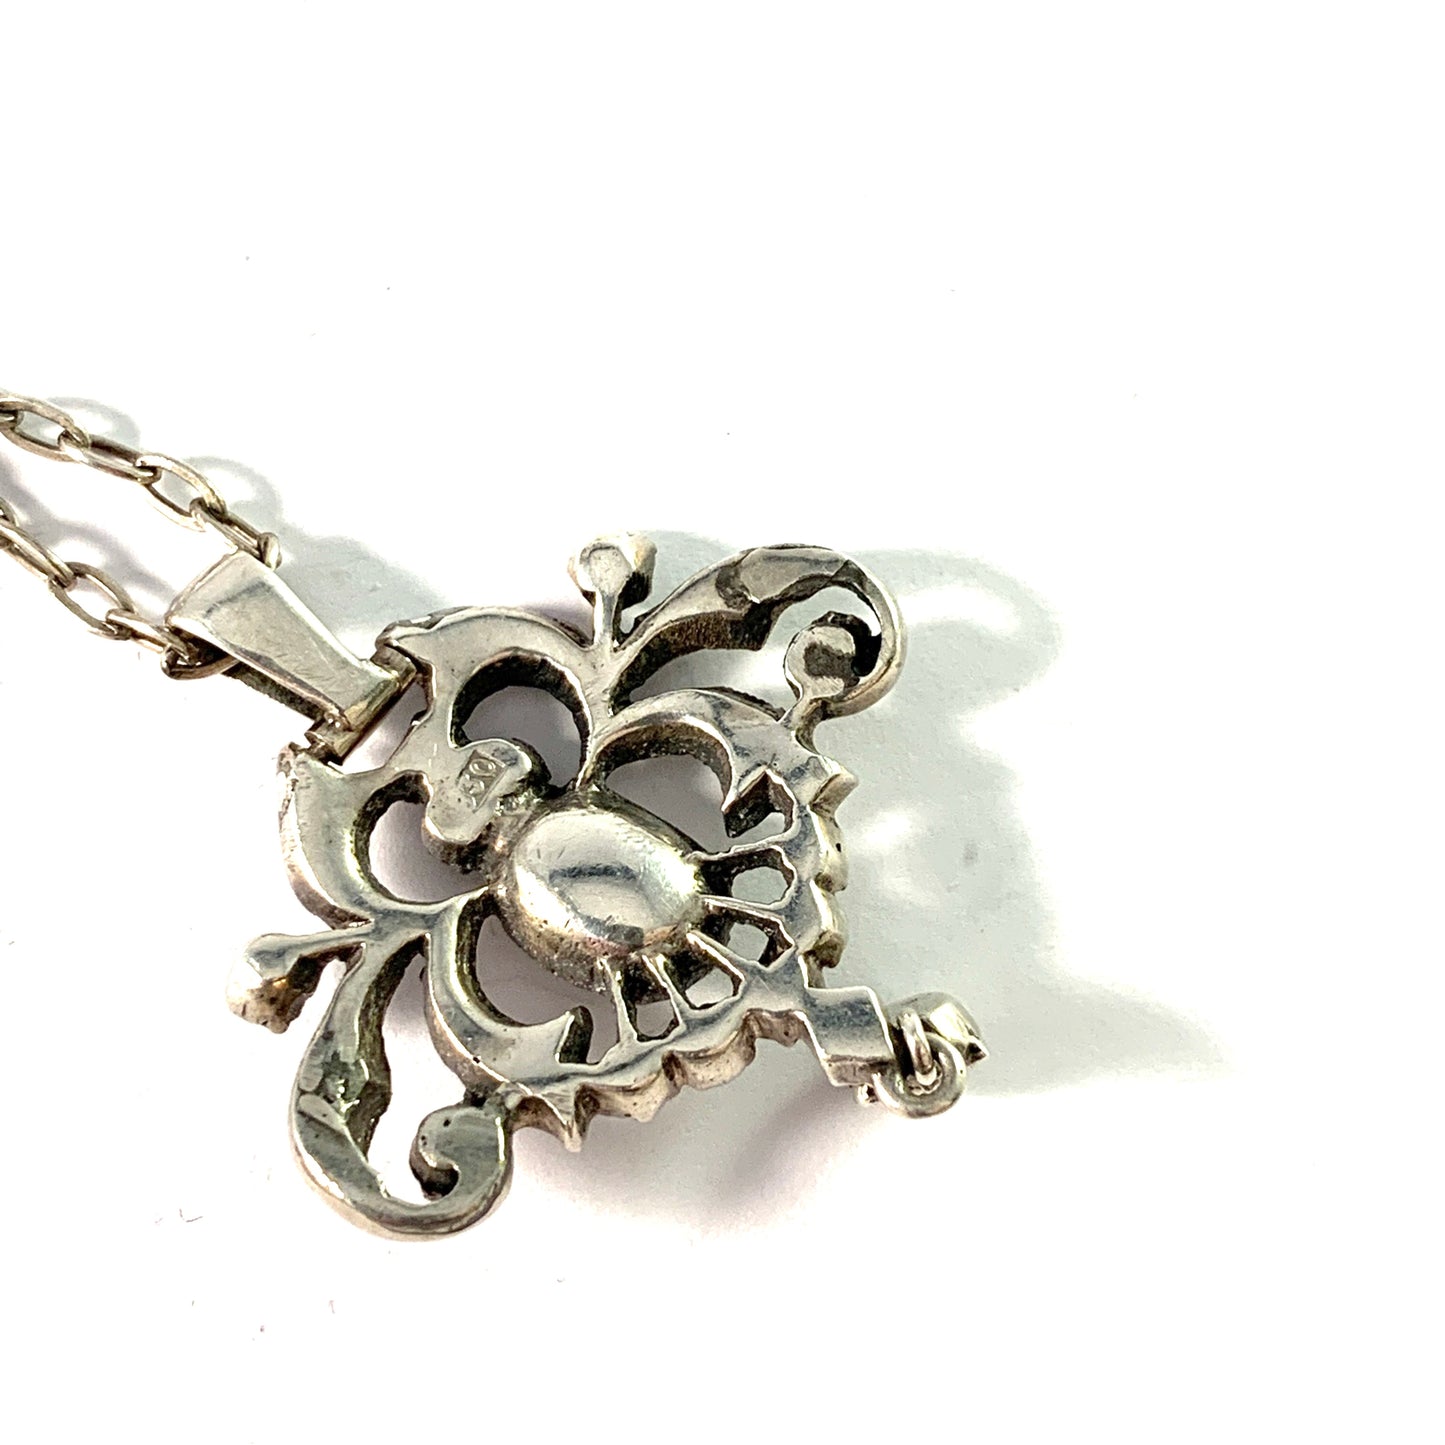 Germany / Austria 1930-40s Solid 835 Silver Paste Stone Pendant Necklace.